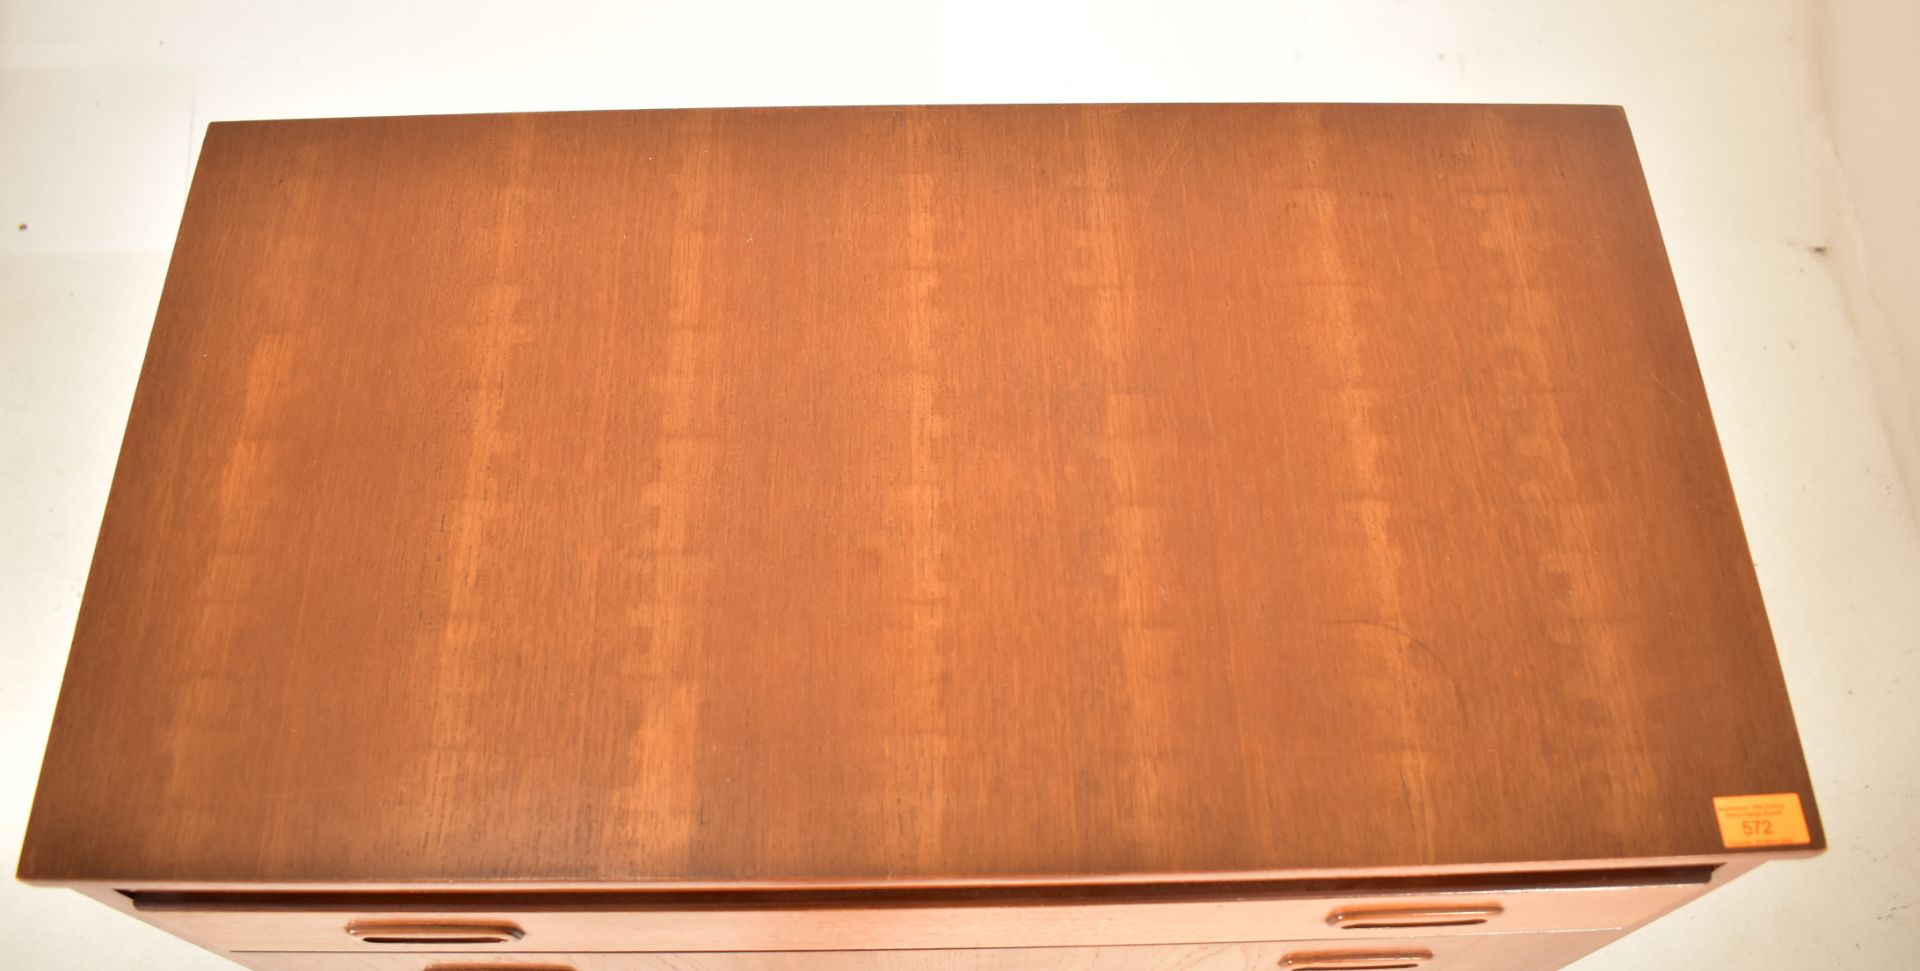 LEBUS FURNITURE - MID CENTURY TEAK UPRIGHT CHEST OF DRAWERS - Image 2 of 5